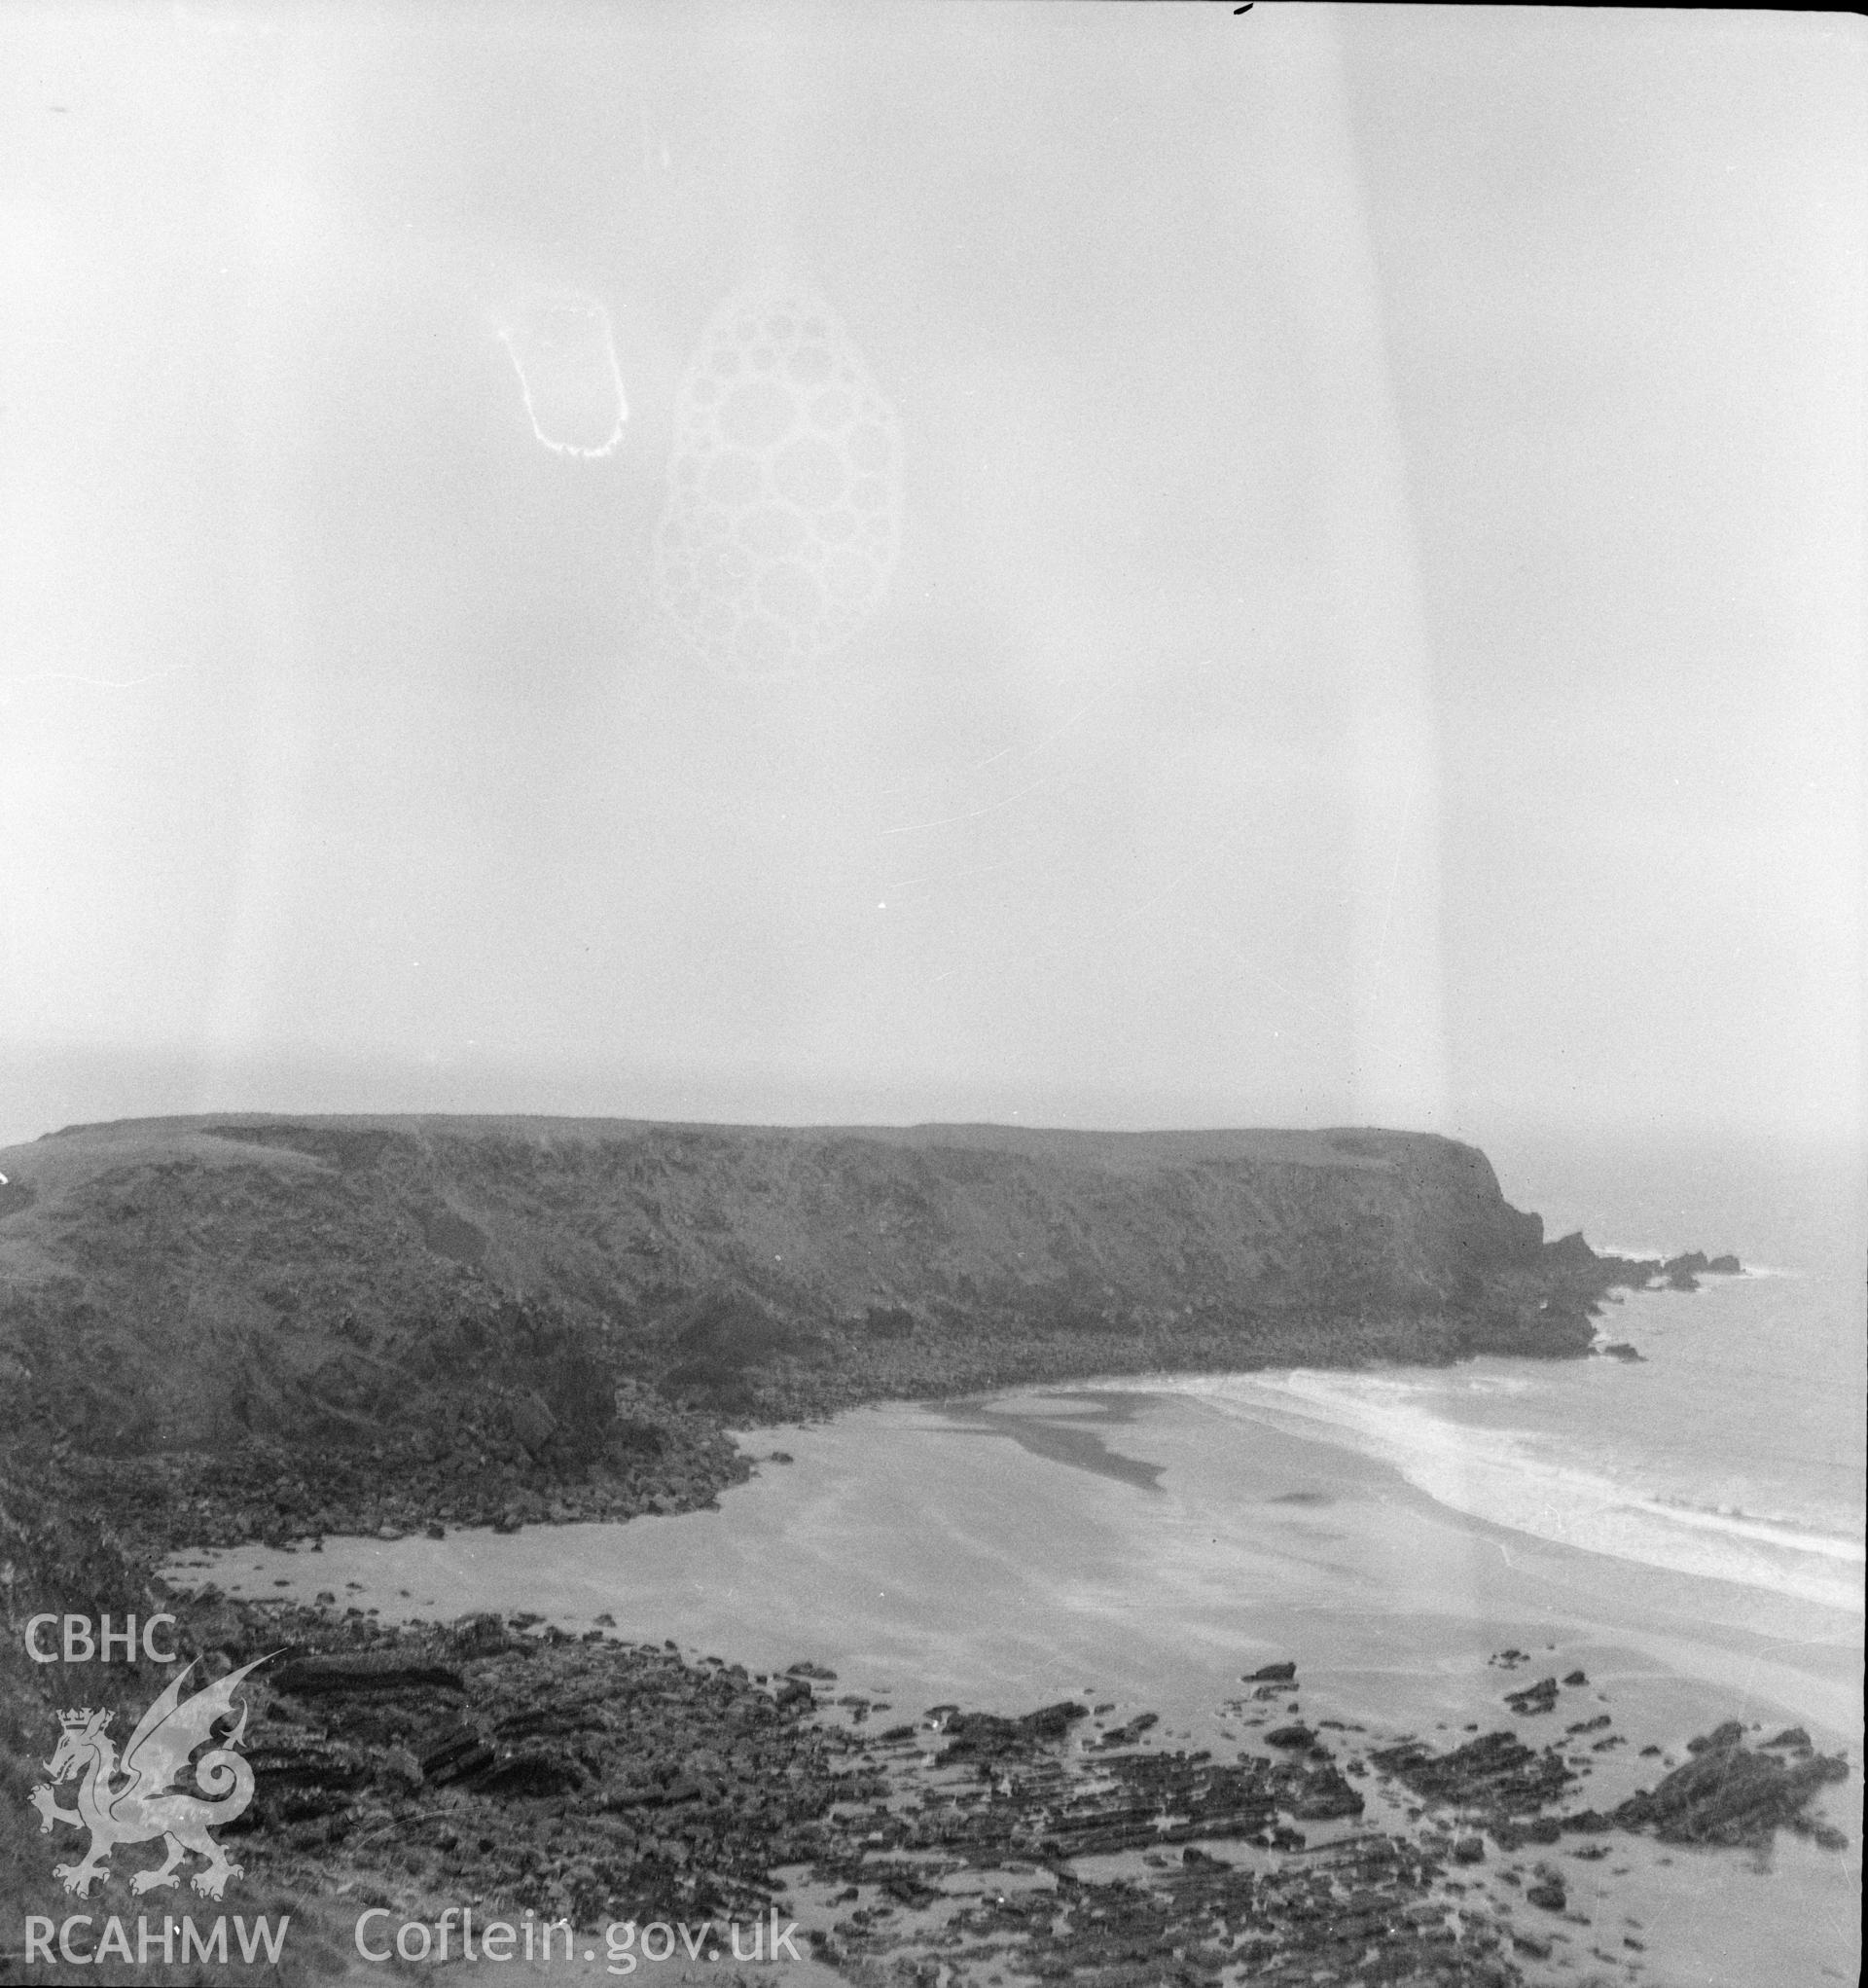 Digital copy of an acetate negative showing "Marloes, Gateholm Island", 15th April 1957.